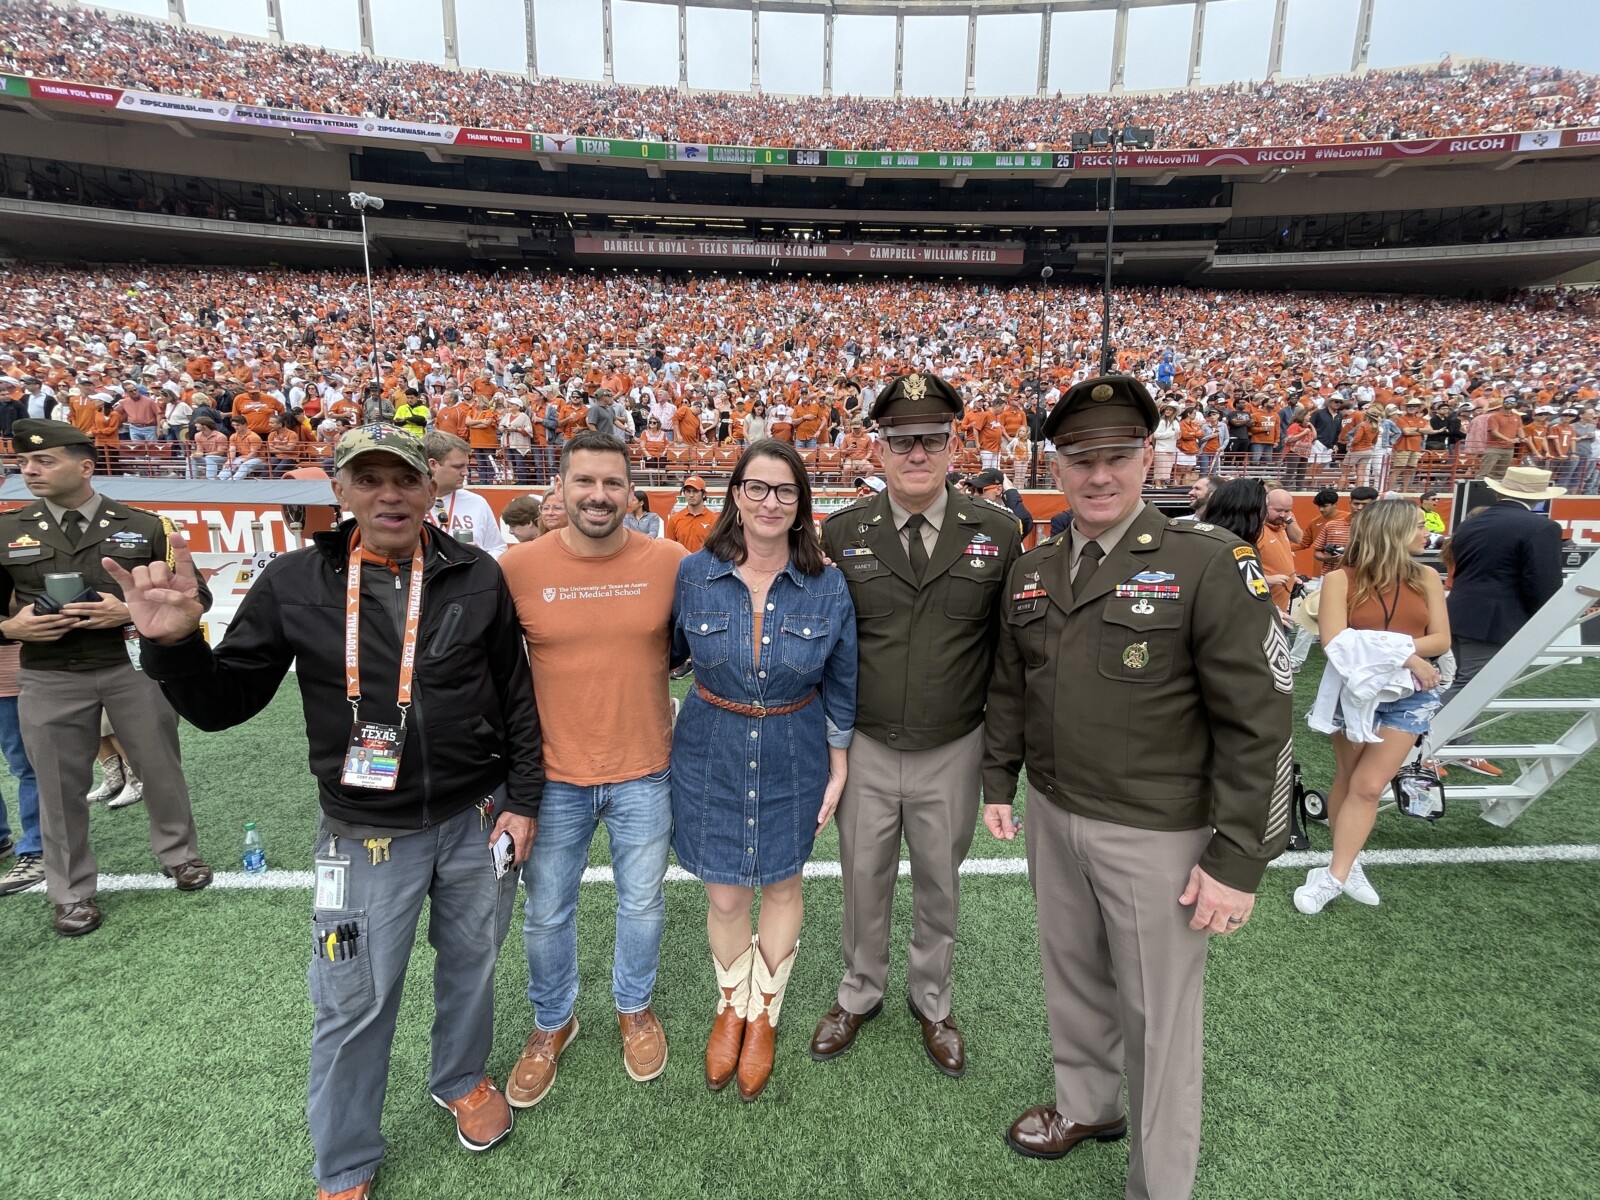 Group photo at the 11/23 Longhorns game - Dr. Borah and General James Rainey